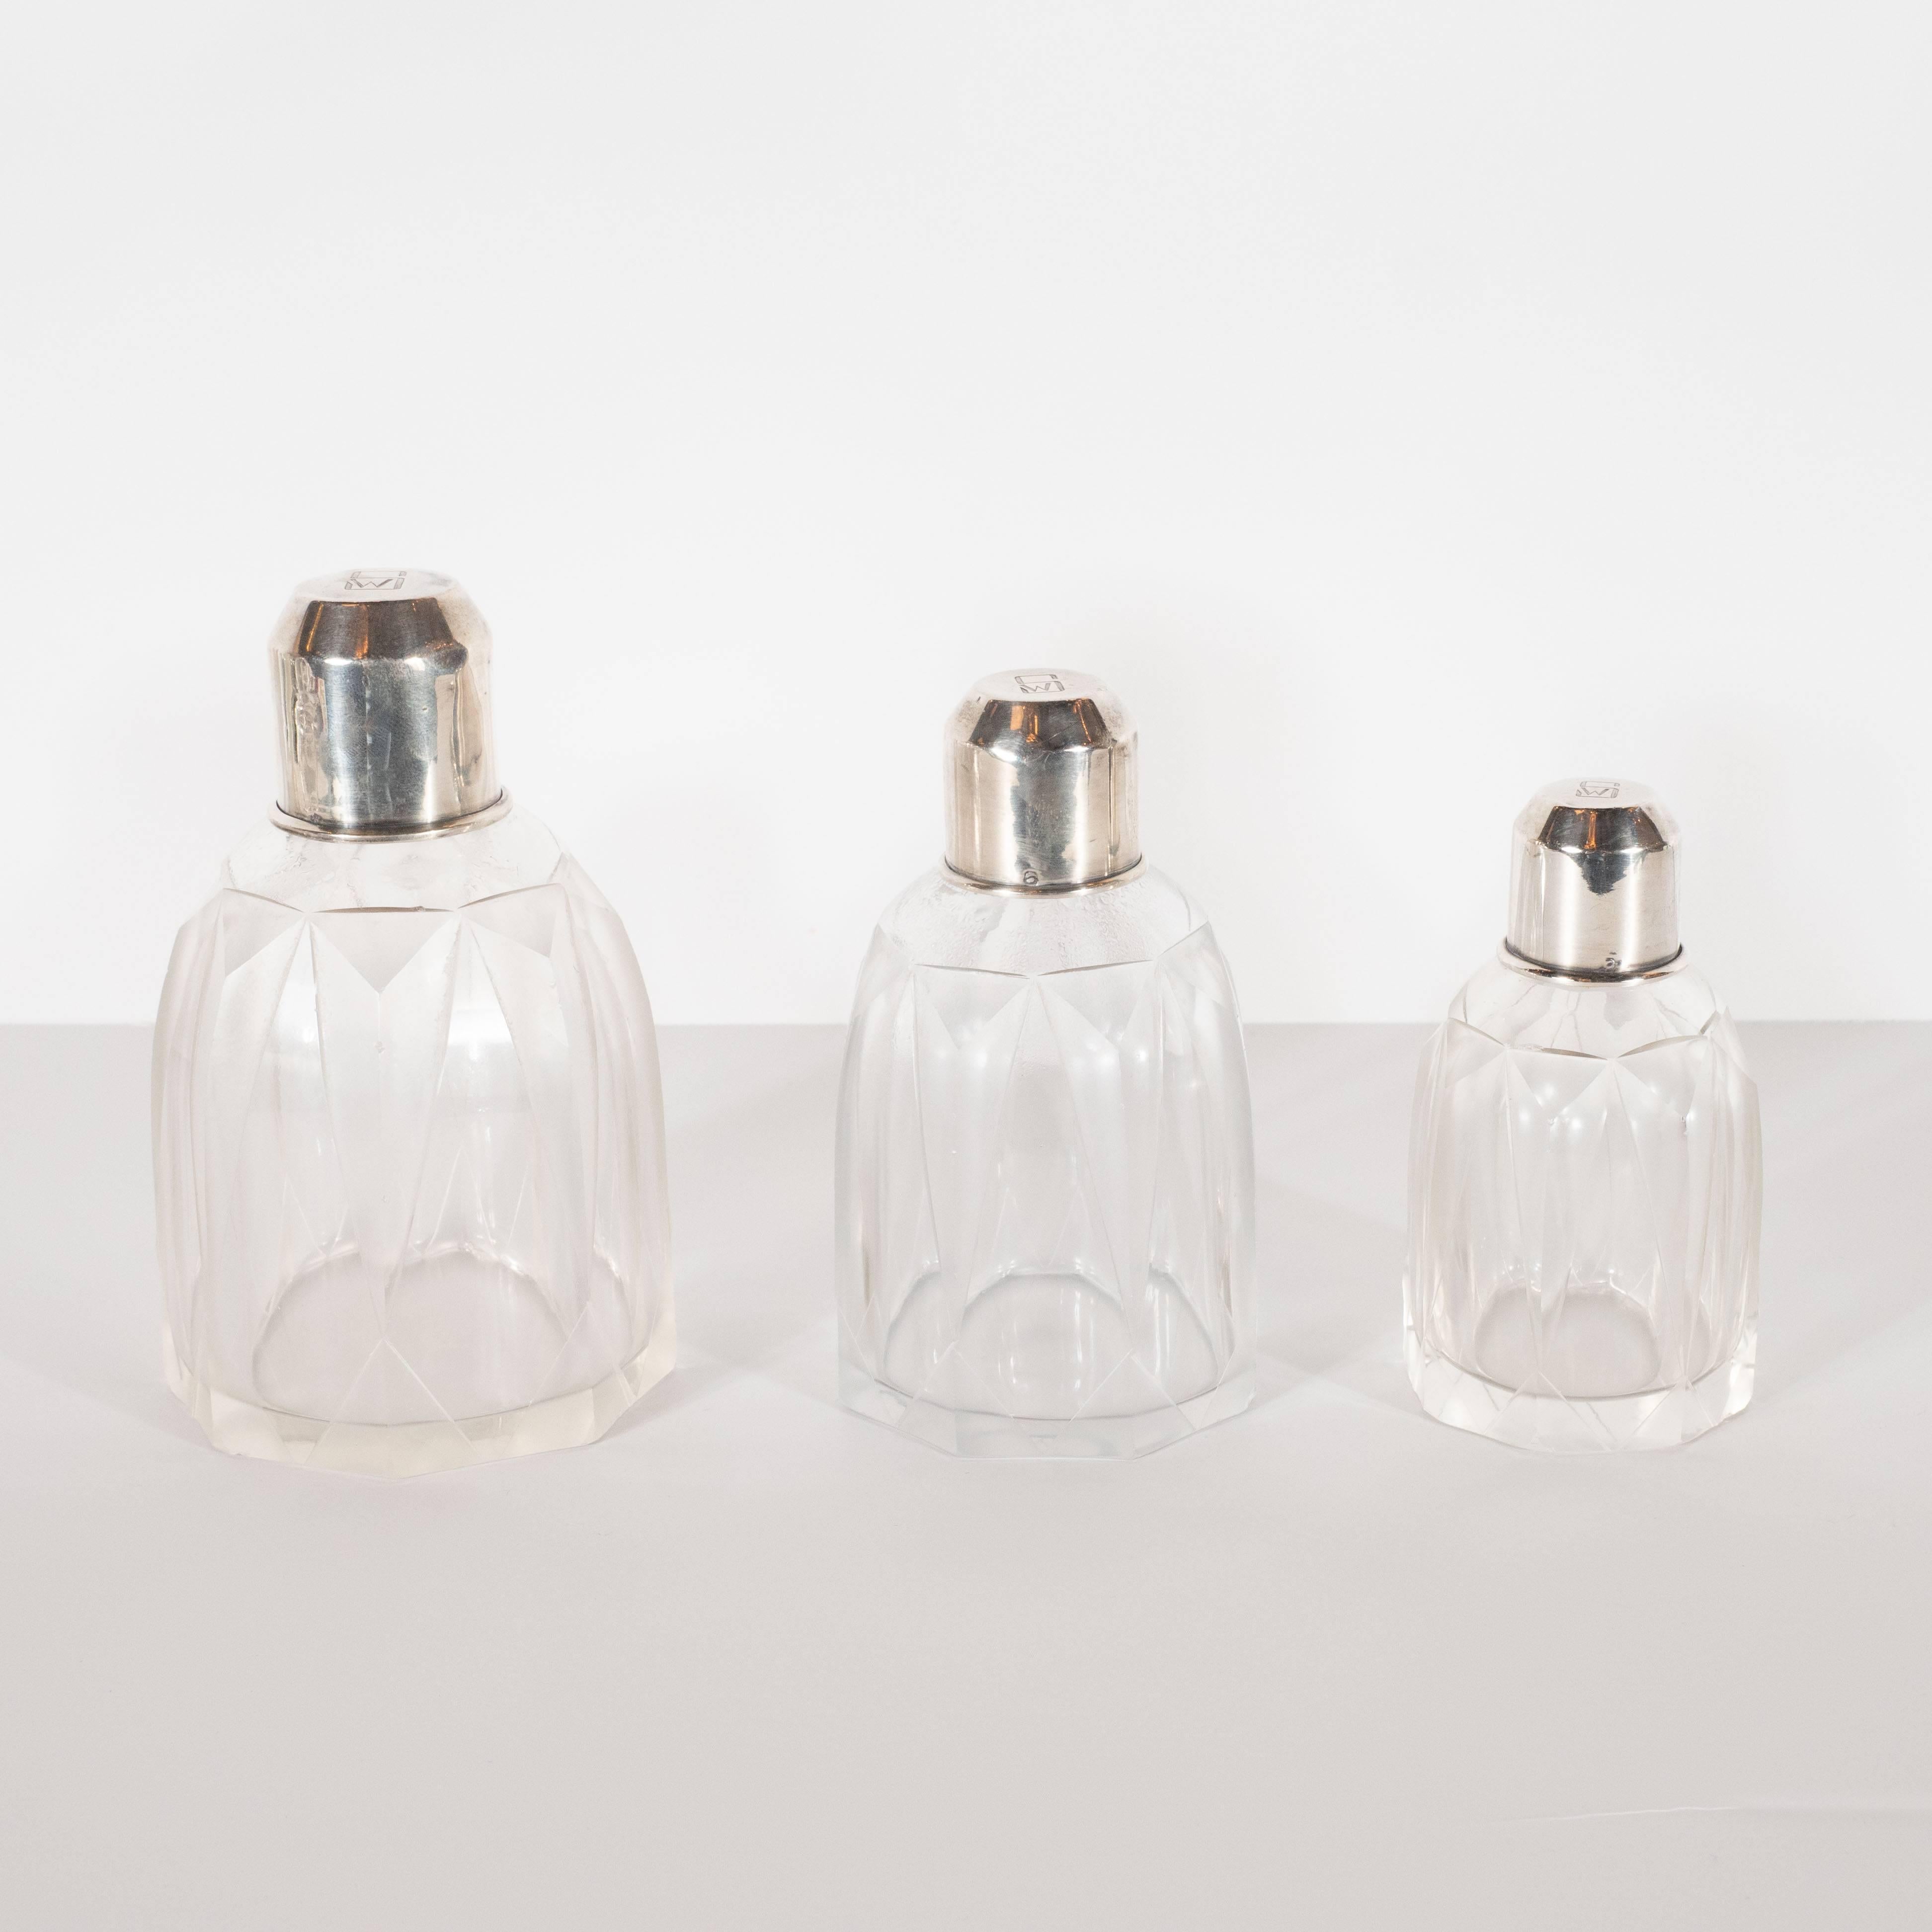 This elegant Machine Age Art Deco Perfume set was realized in France- where the finest silversmiths resided during this period- circa 1930. It features three octagonal vessels of varying sizes with triangular forms etched in relief; cylindrical